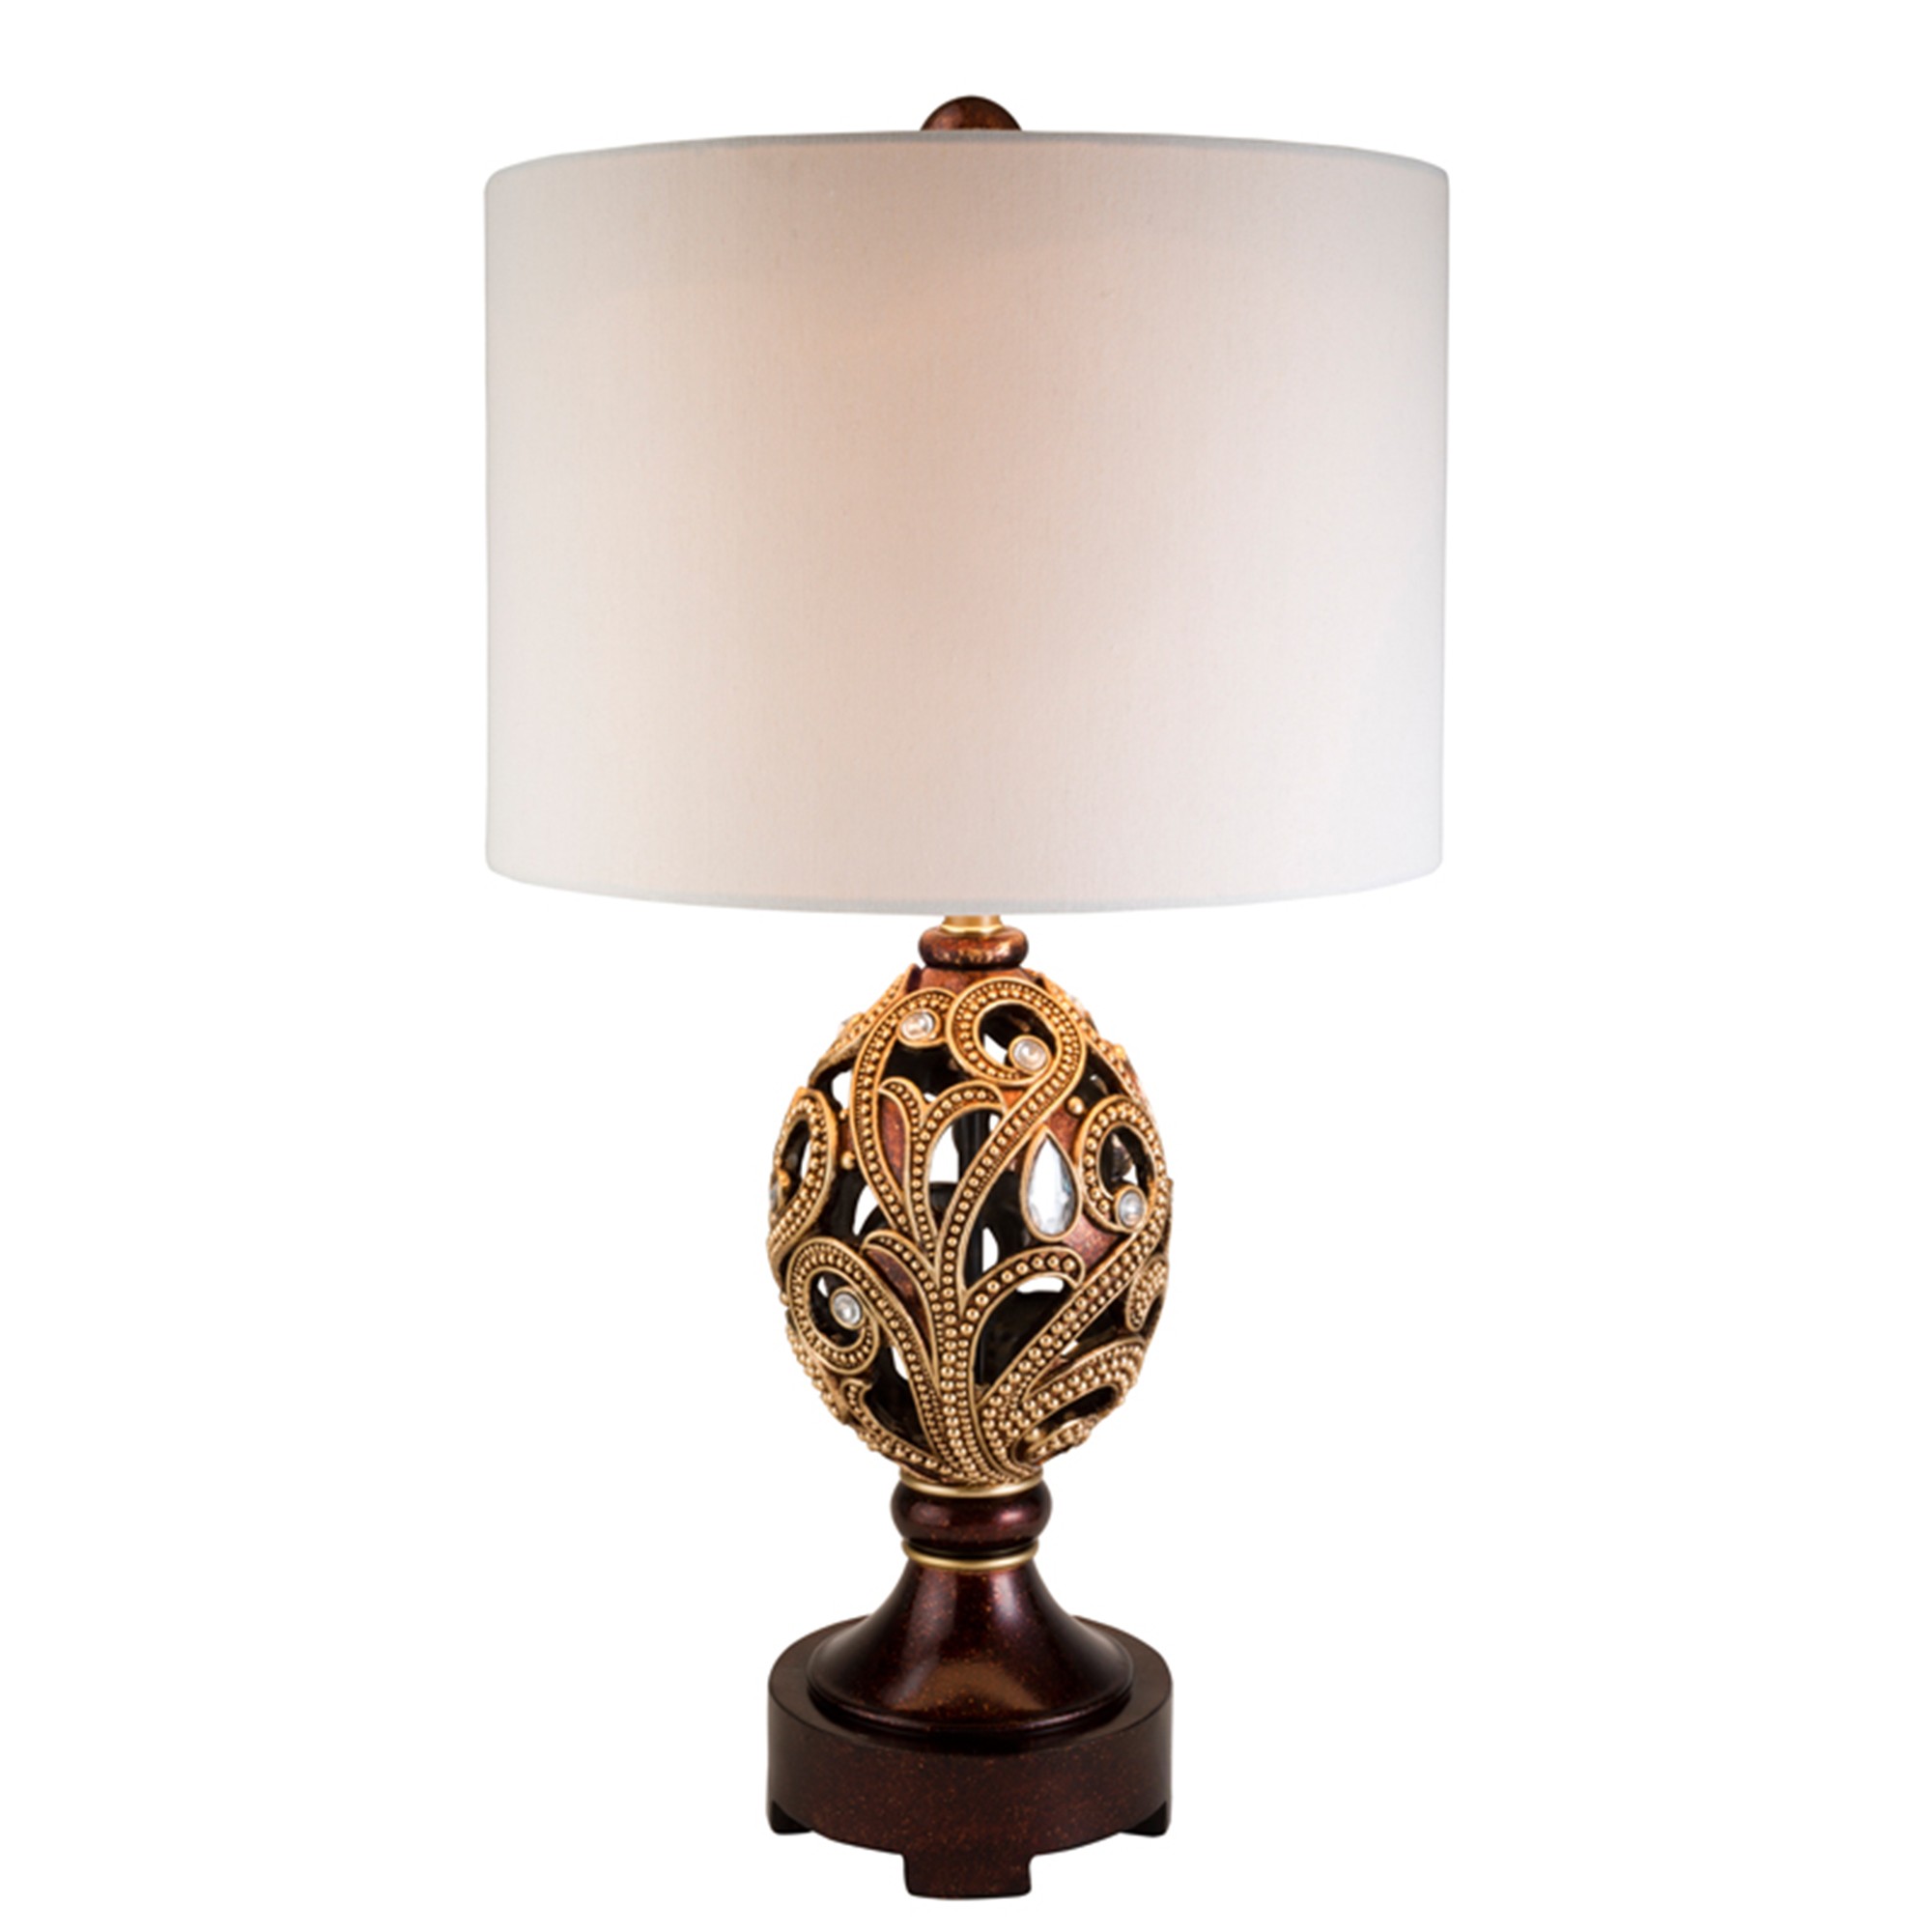 Aged and Antiqued Mahogany Table Lamp